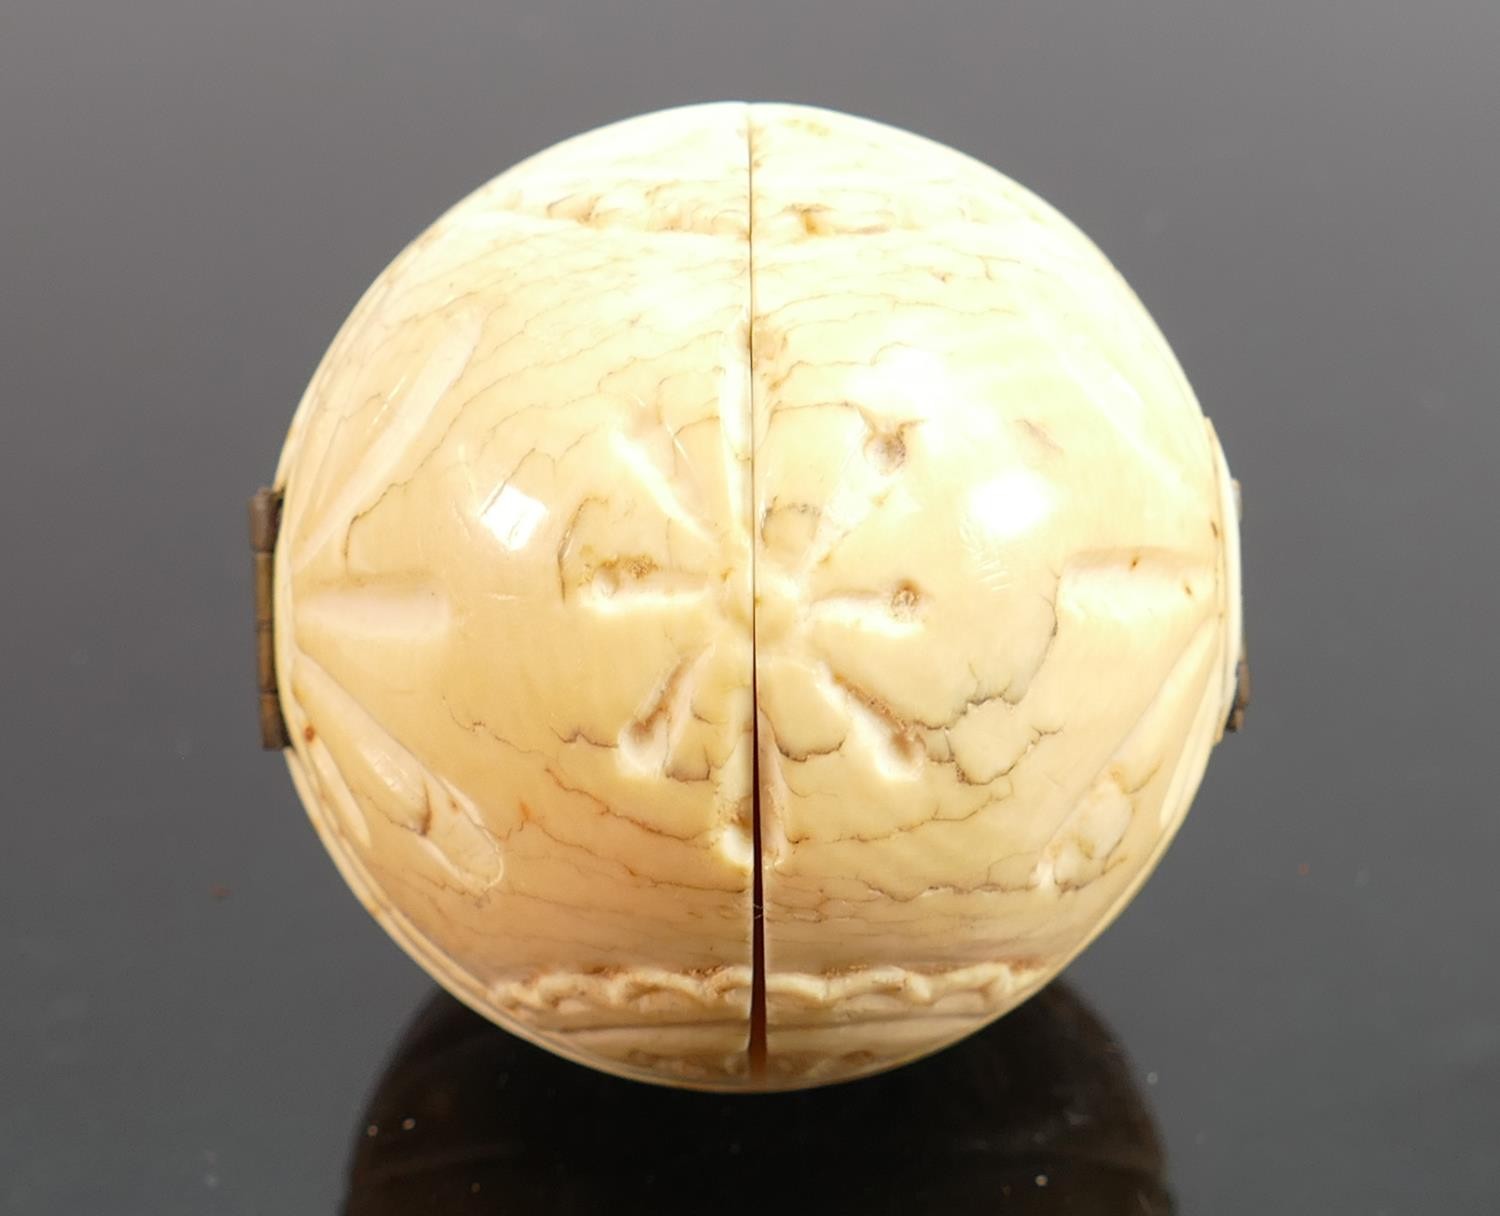 18/19th century Dieppe carved Ivory Triptych with religious scene: Diameter 5cm. Please note that as - Image 2 of 2